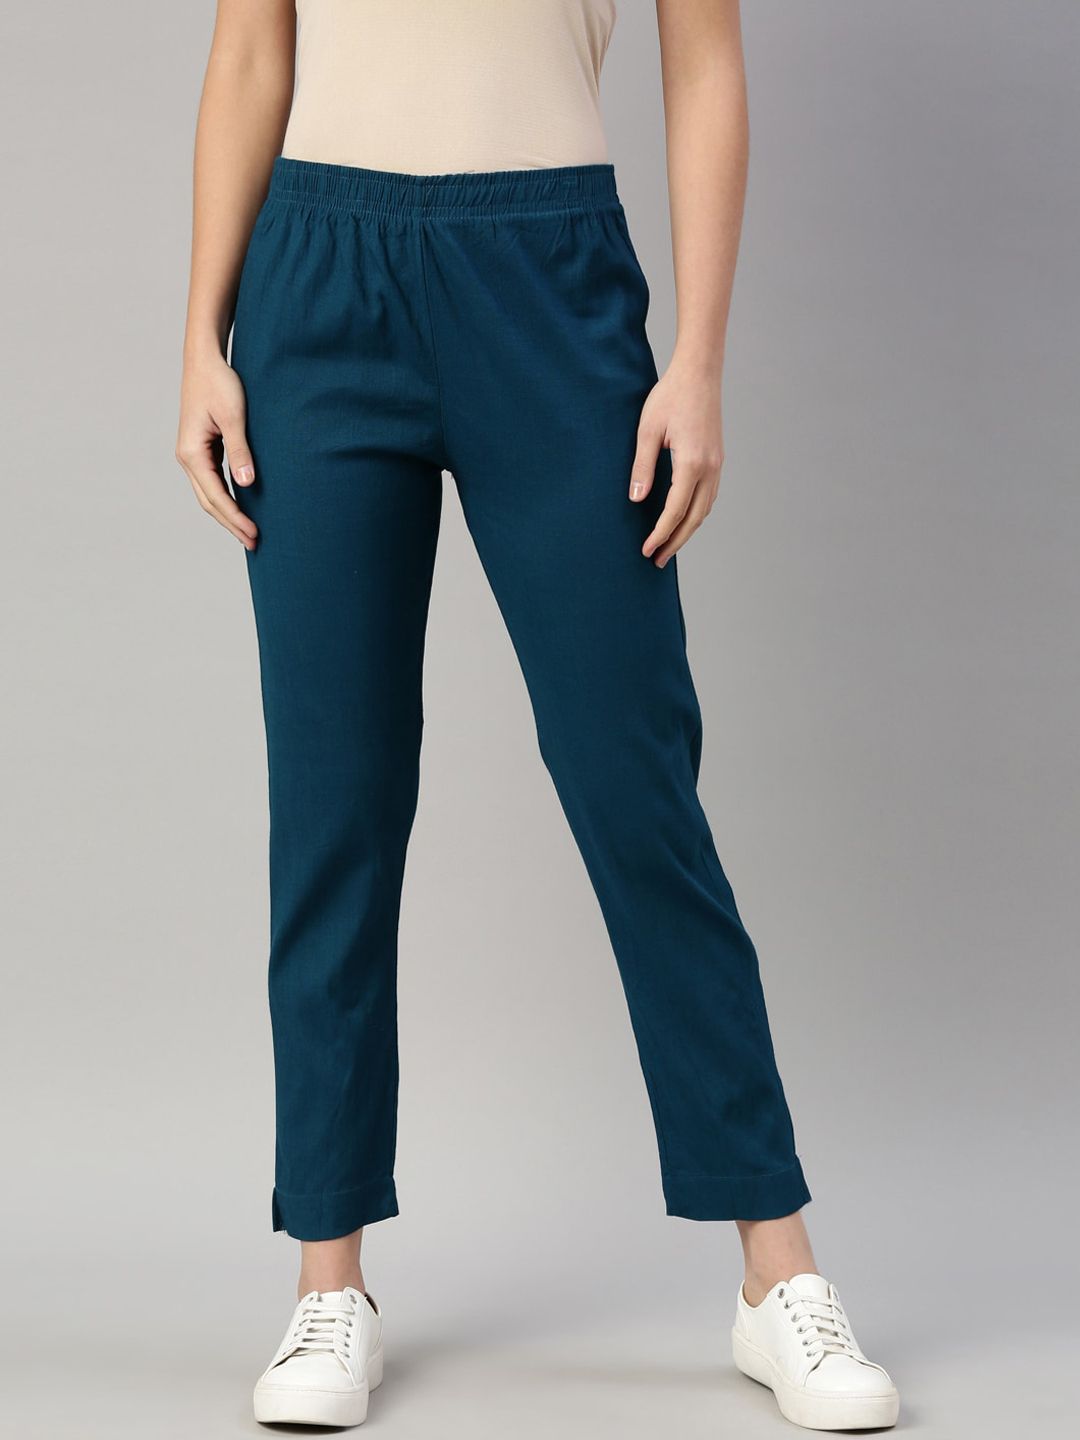 GOLDSTROMS Women Blue Trousers Price in India